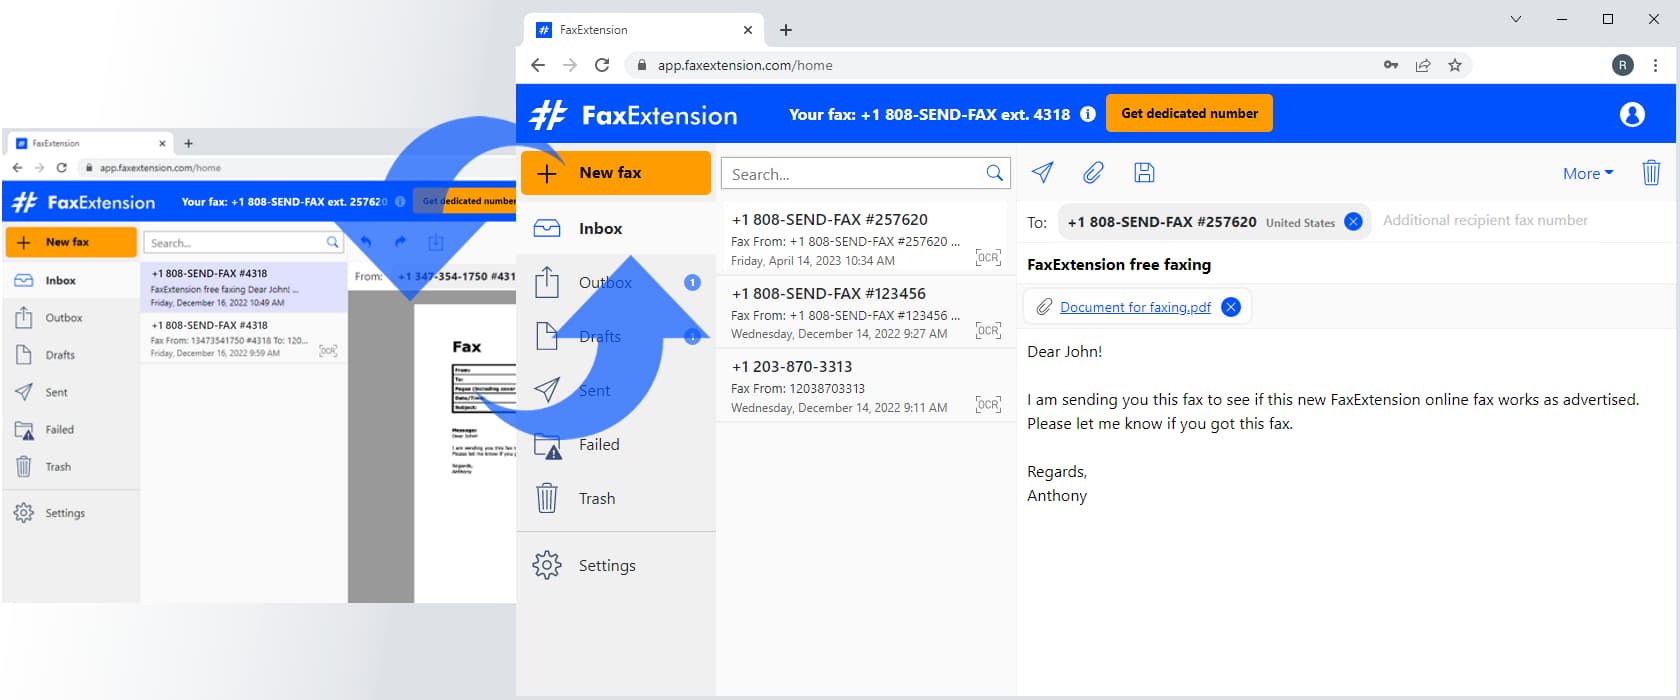 Fax over internet with FaxExtension